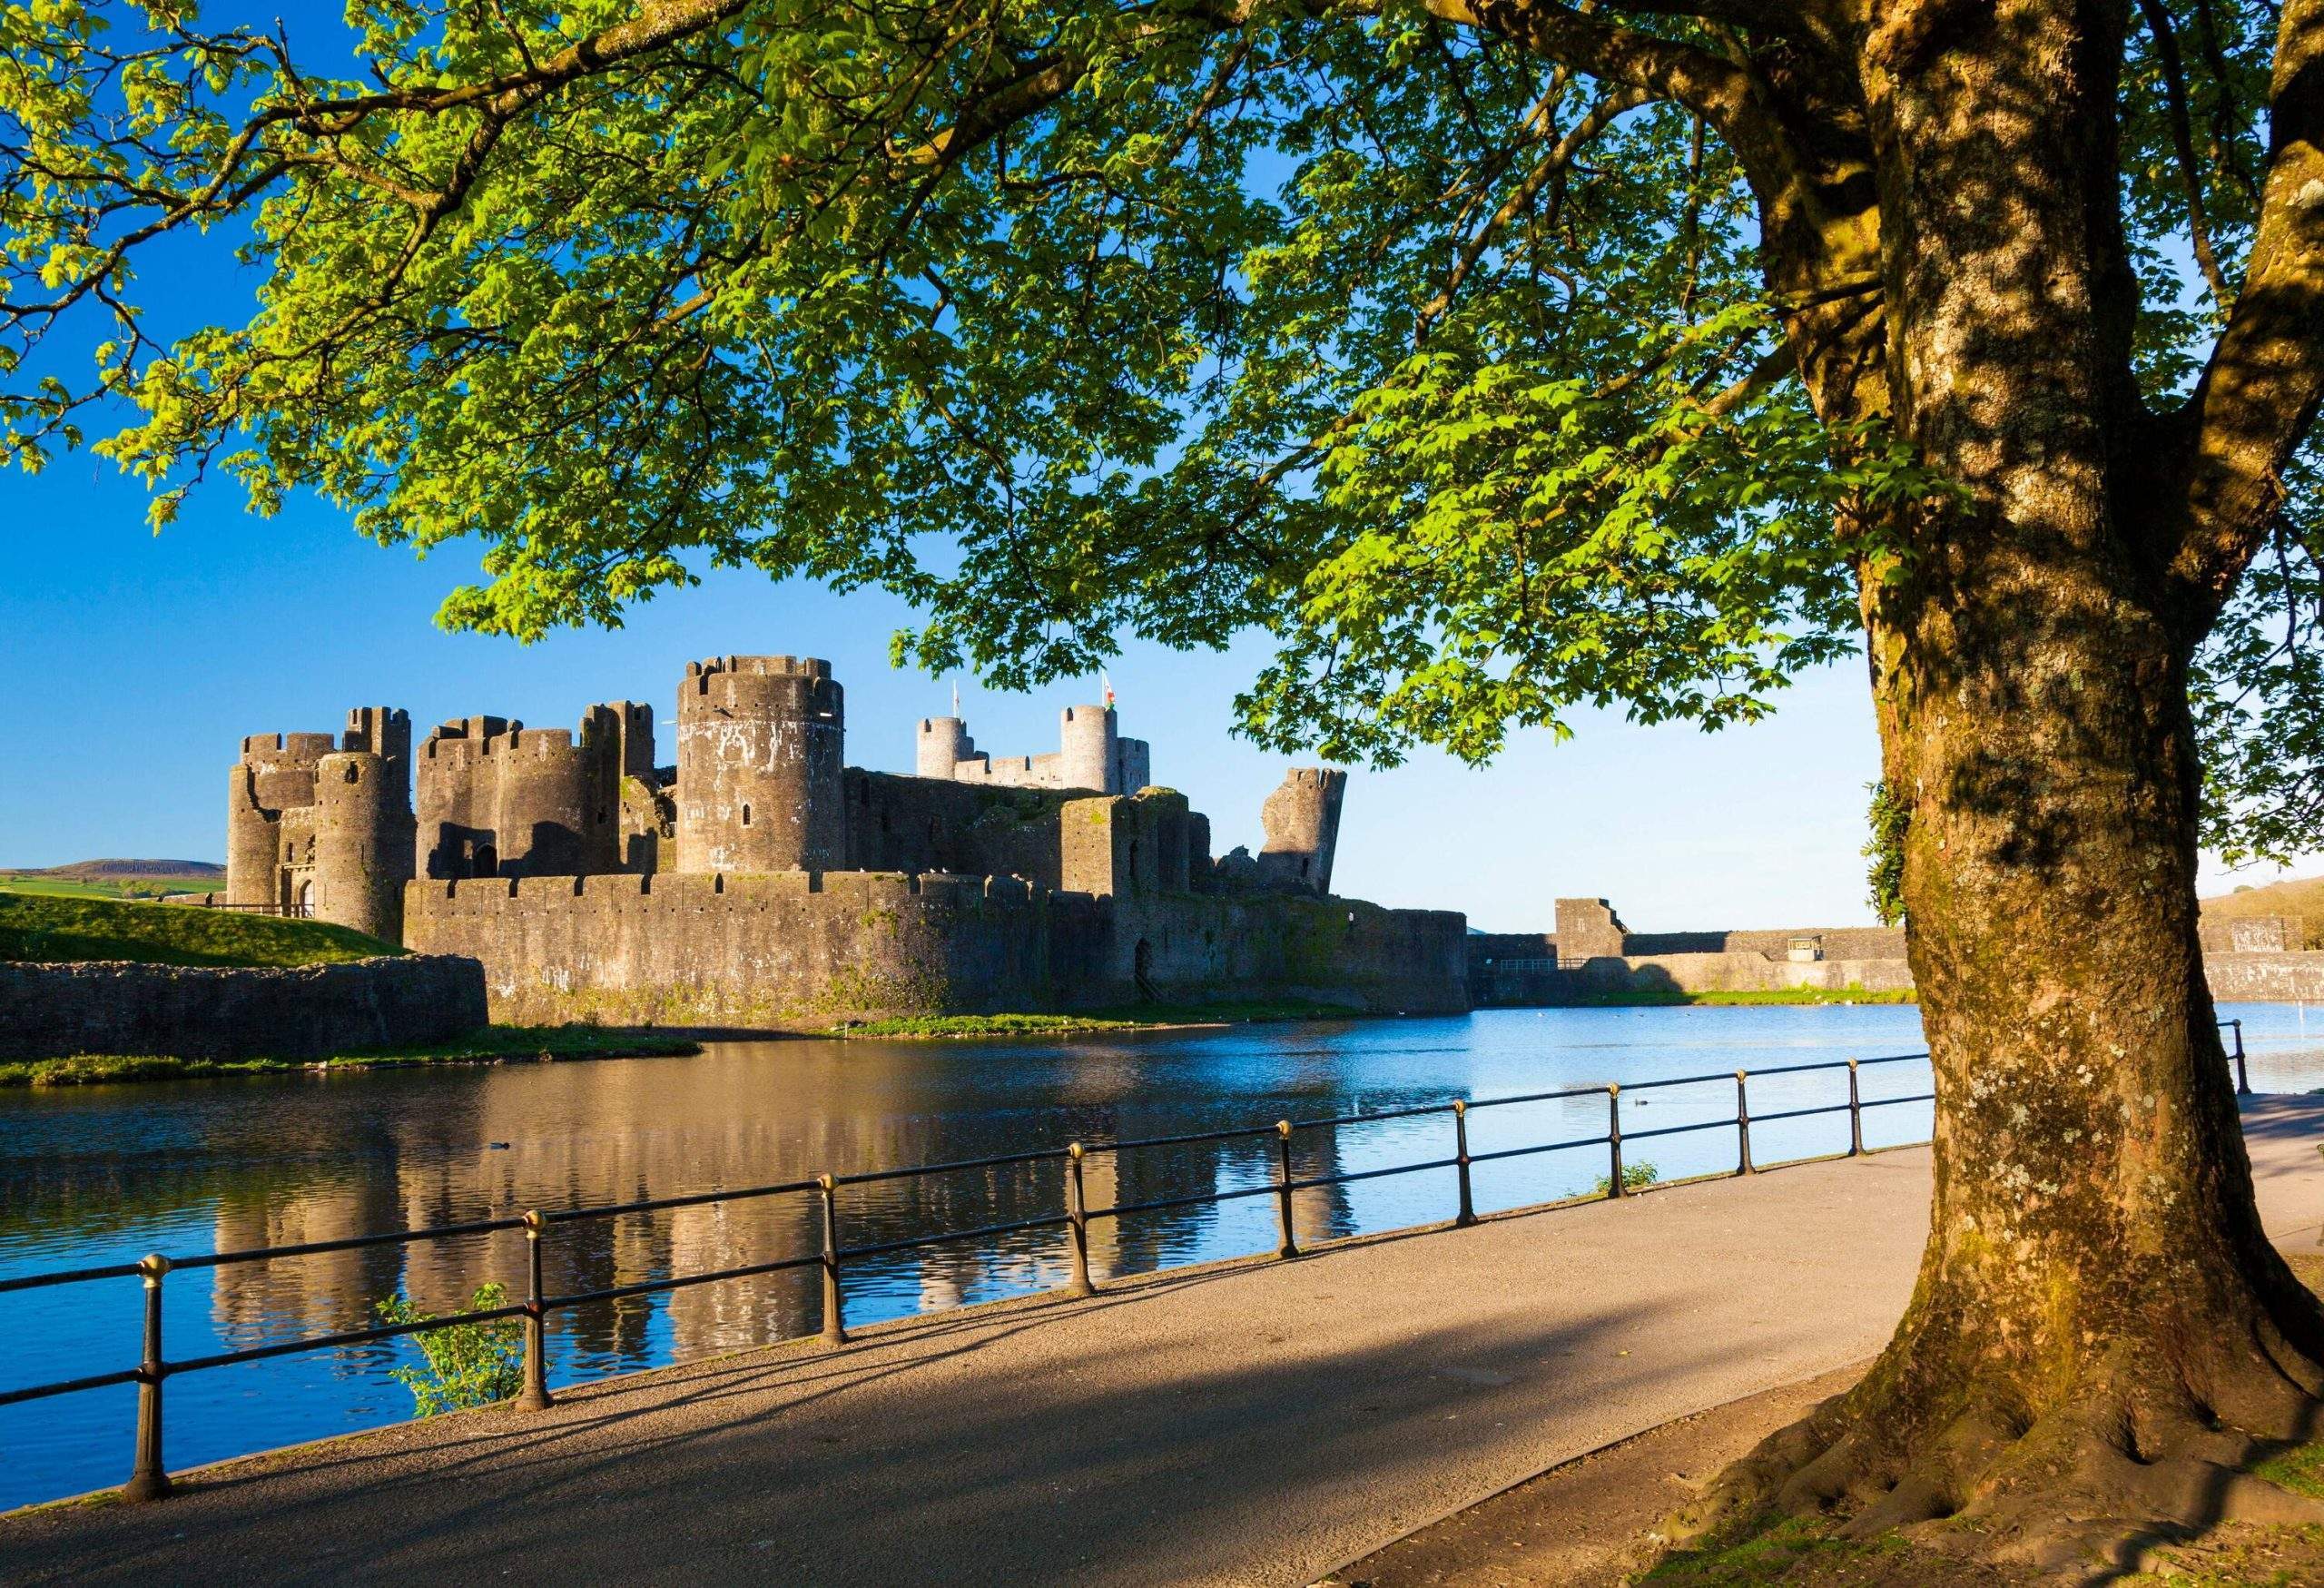 A fenced walkway beneath a large tree that offers views of the river and the medieval Caerphilly Castle.